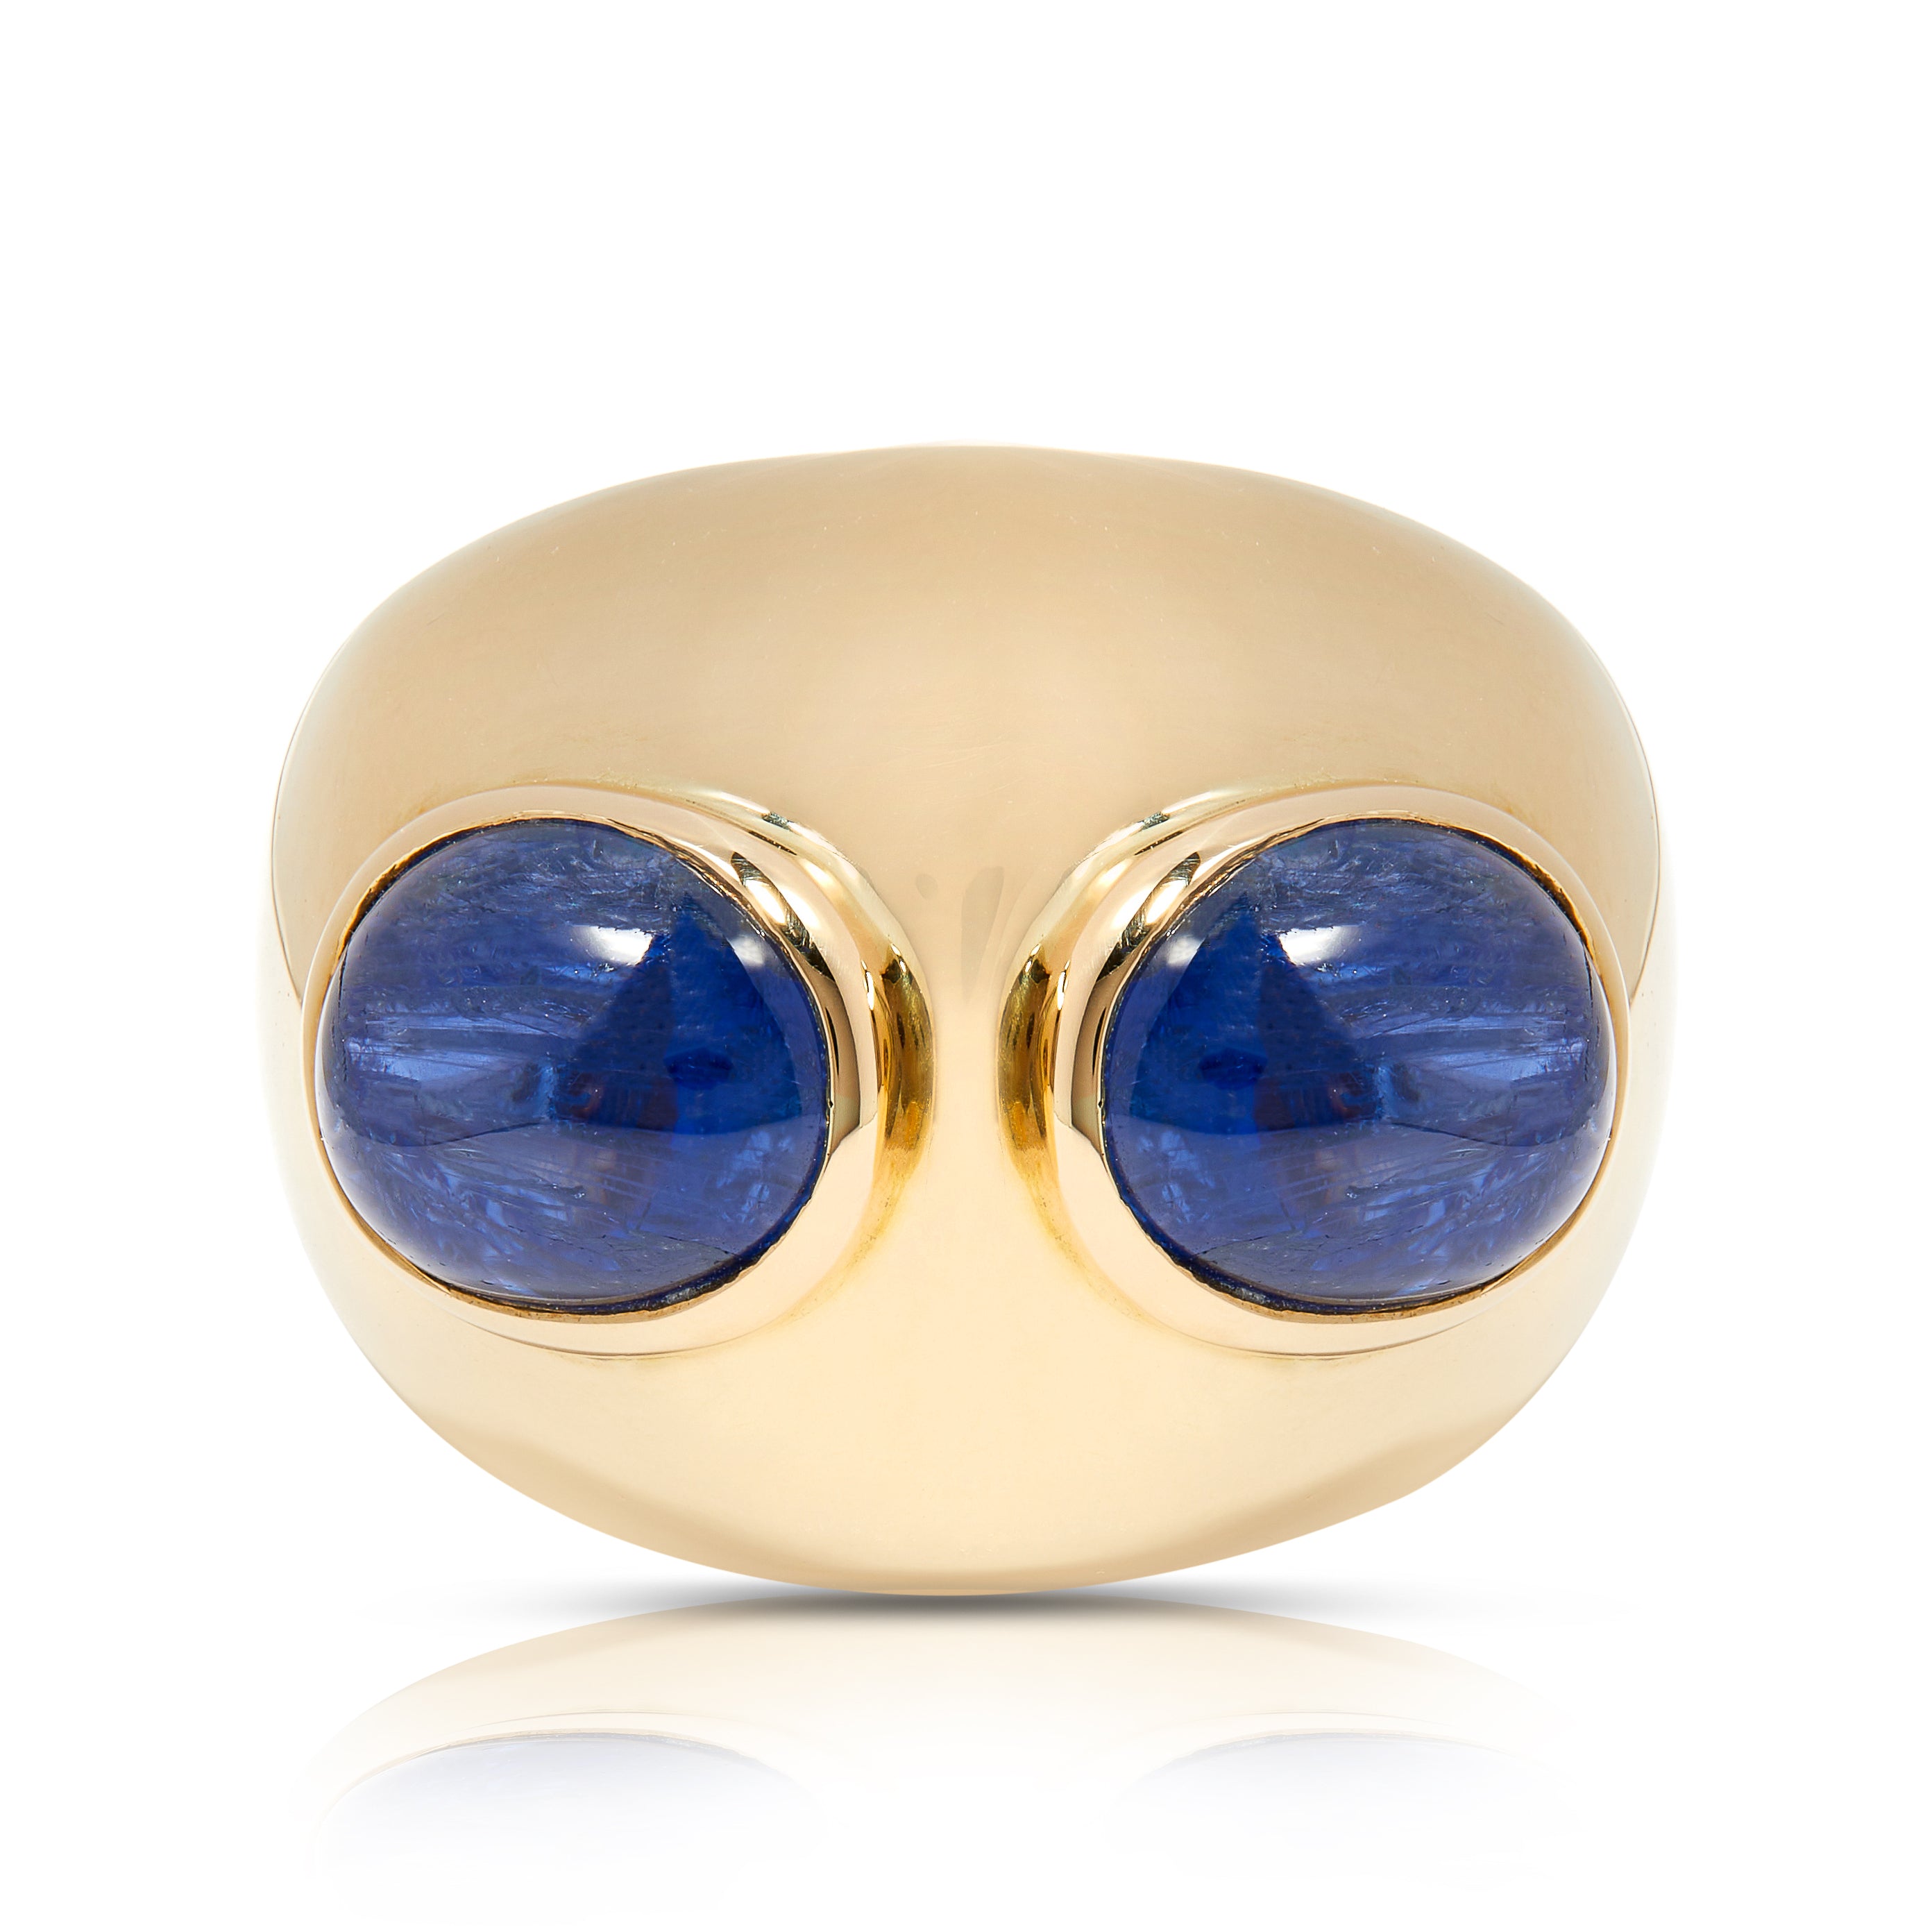 Statement gold cocktail ring with two blue sapphires.